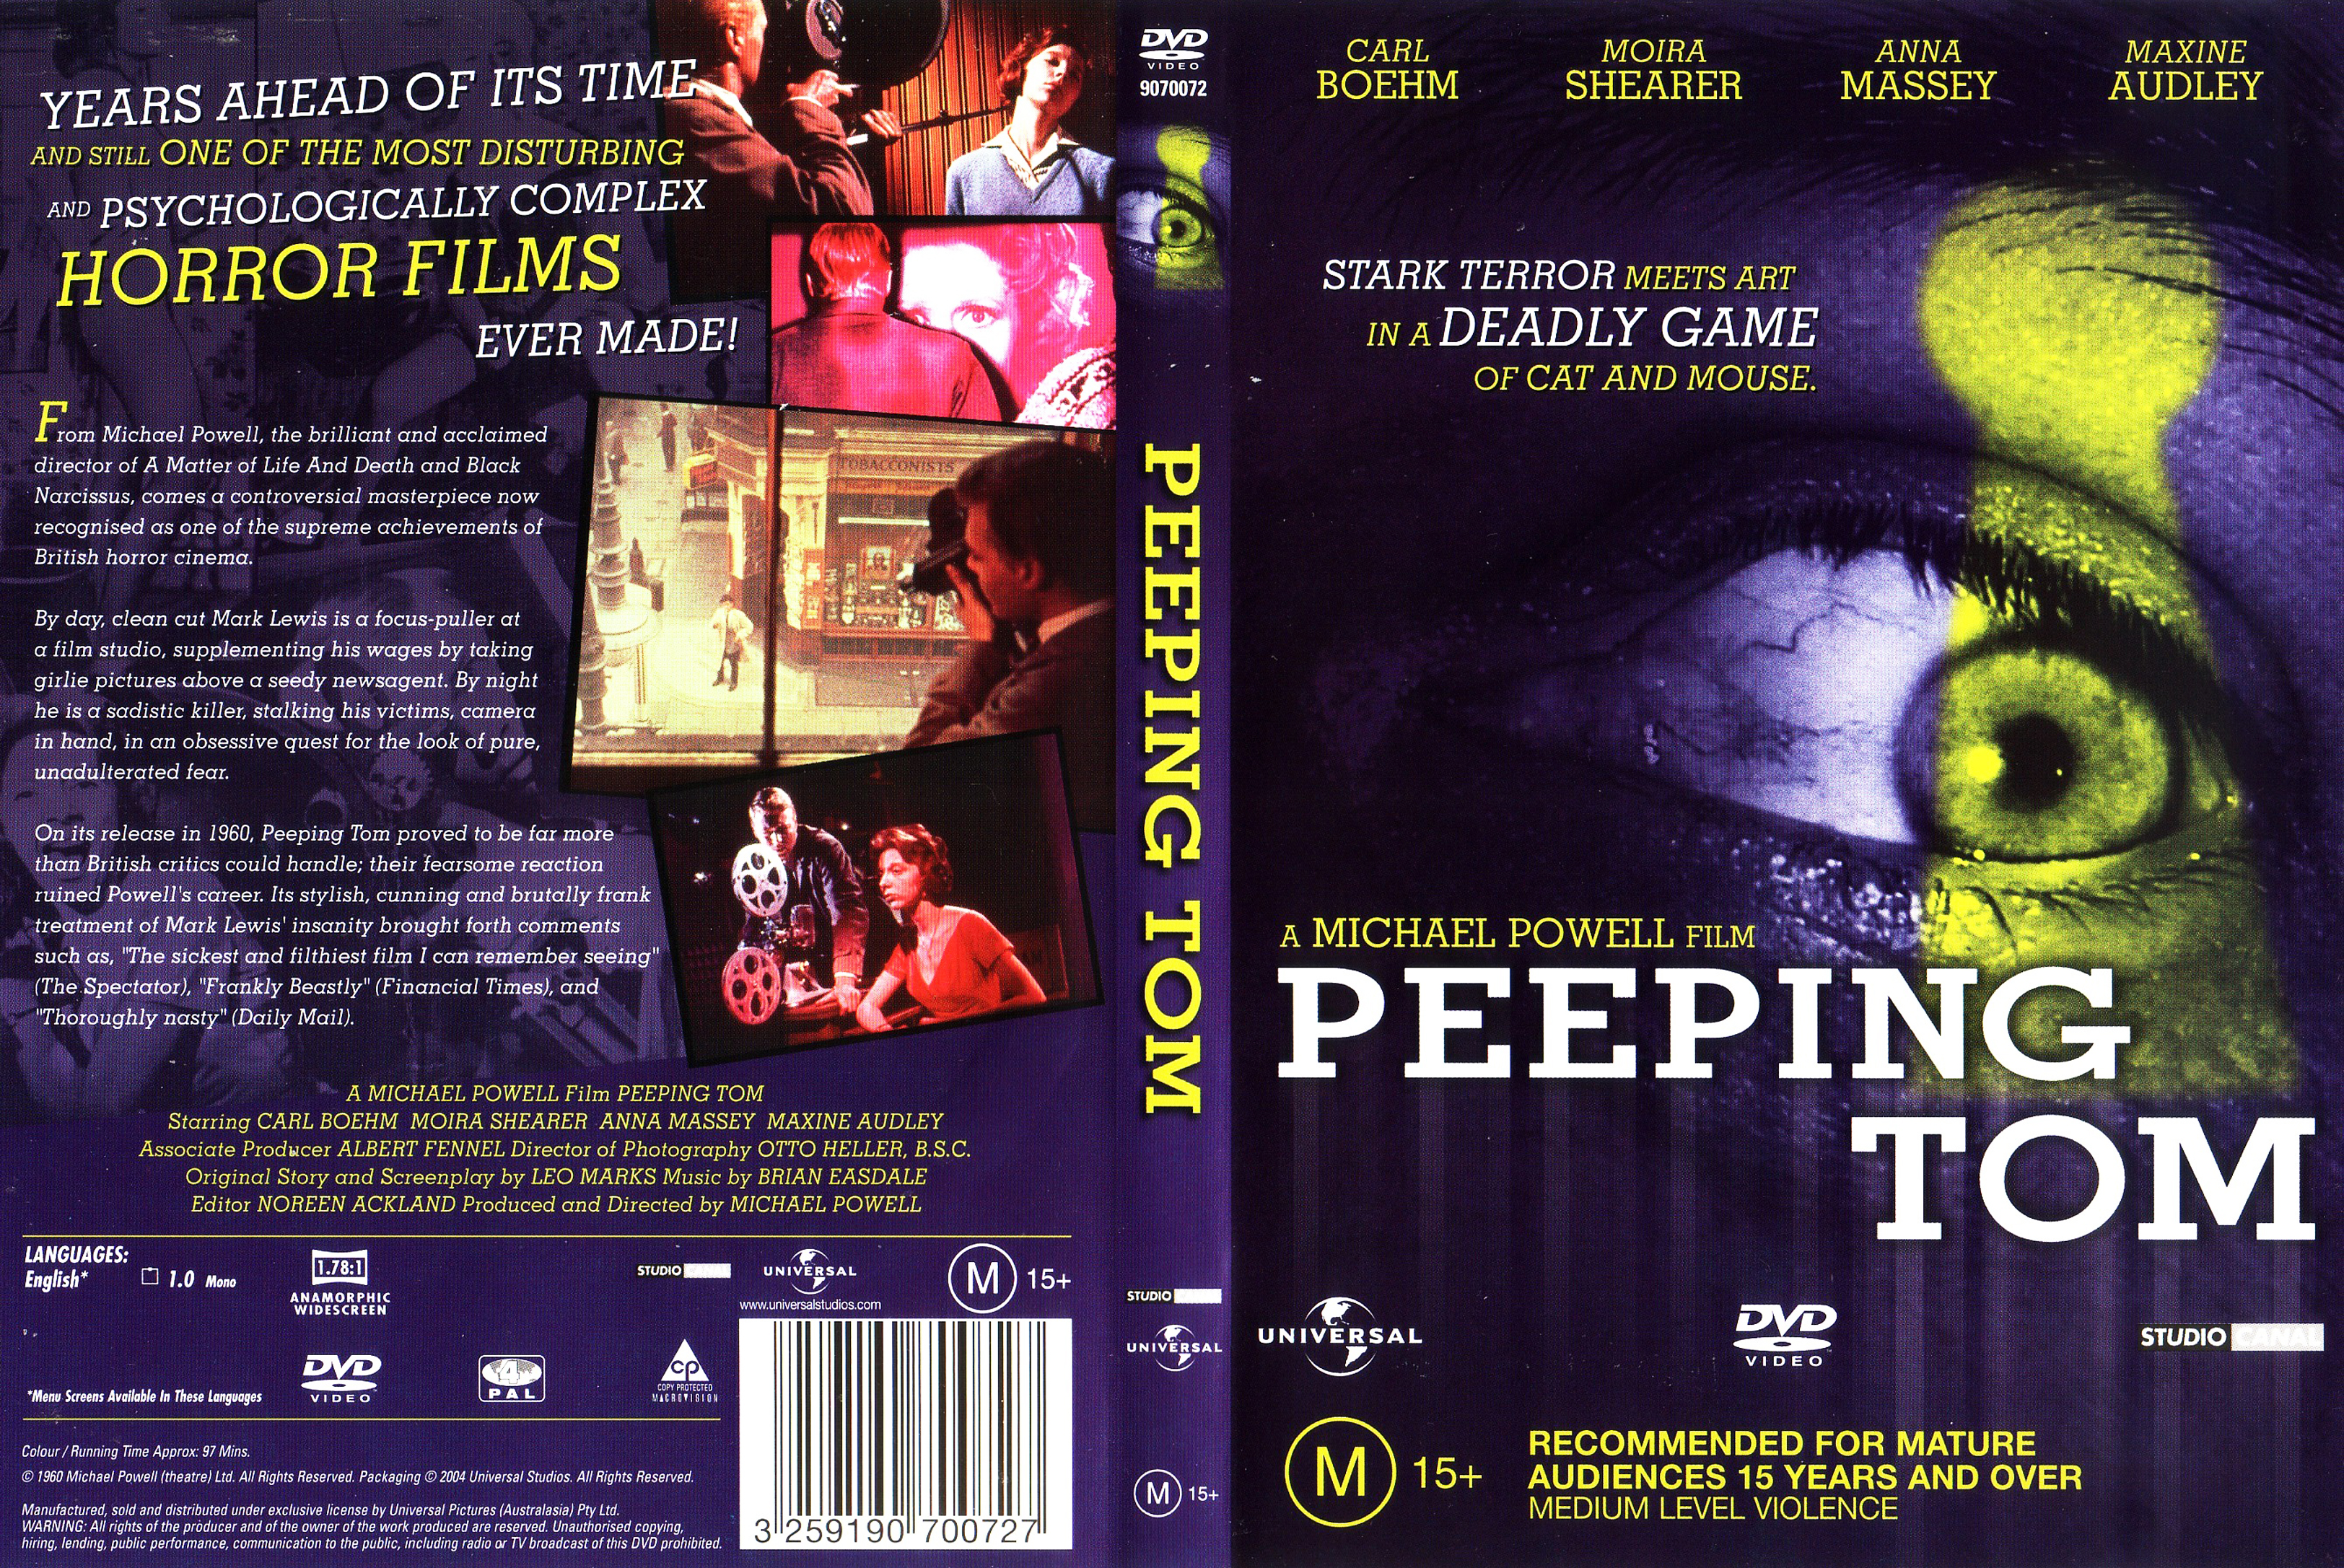 Jaquette DVD Peeping Tom Zone 1